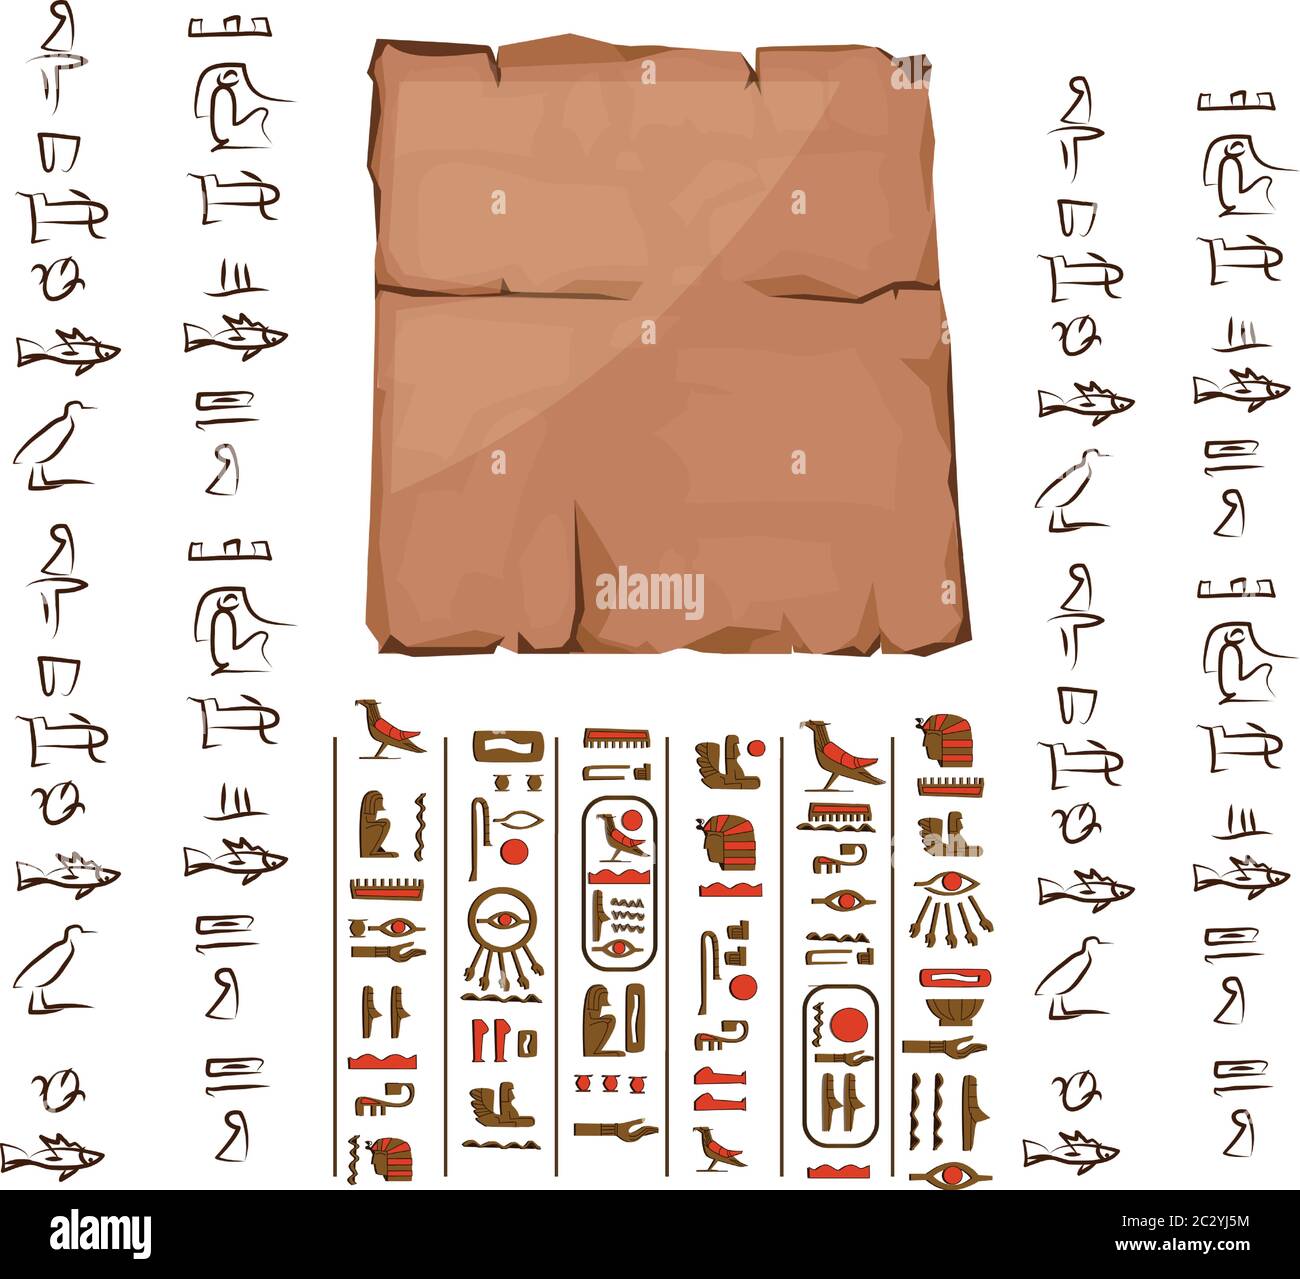 Ancient Egypt papyrus part cartoon vector illustration. Ancient paper with hieroglyphs, Egyptian culture religious symbols, facility for storing infor Stock Vector